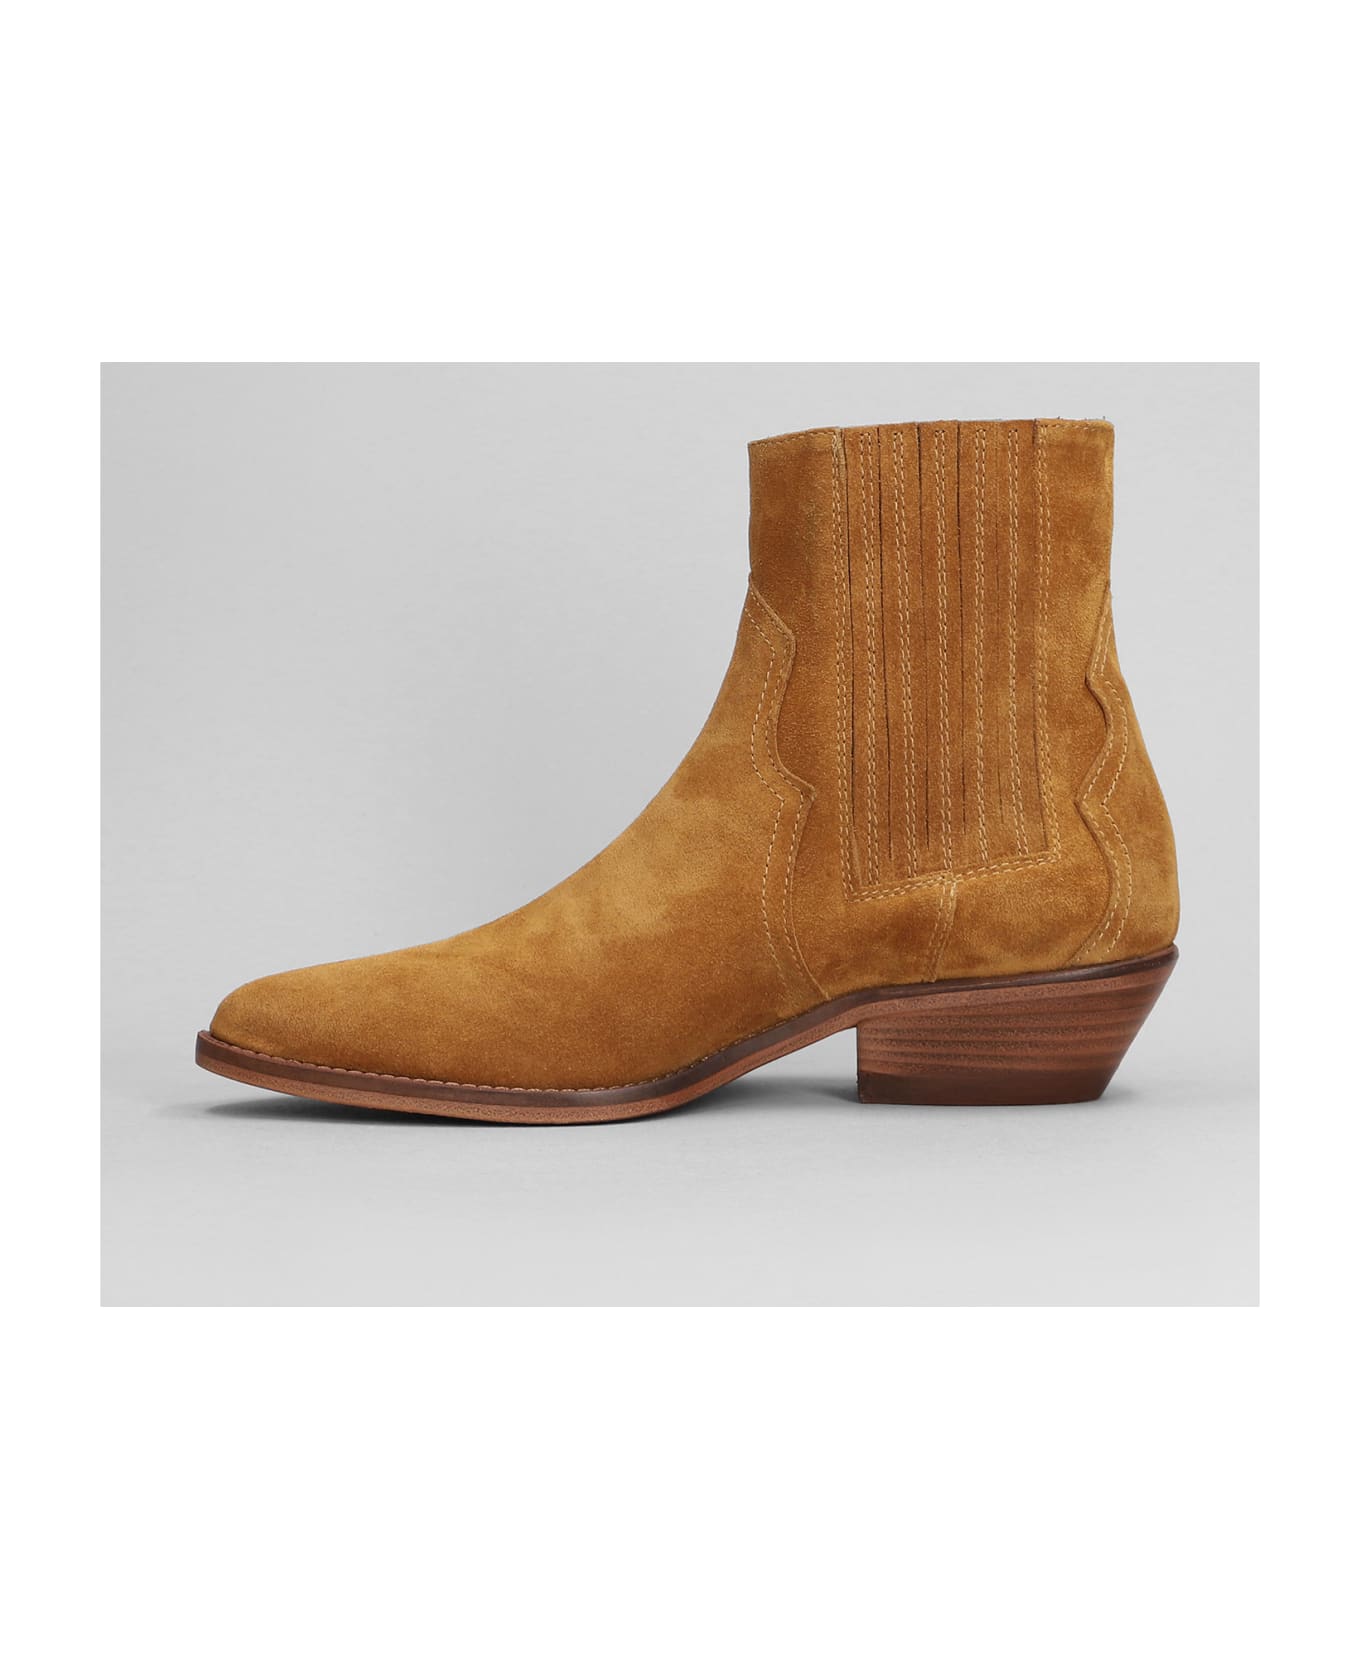 Julie Dee Texan Ankle Boots In Leather Color Suede - leather color